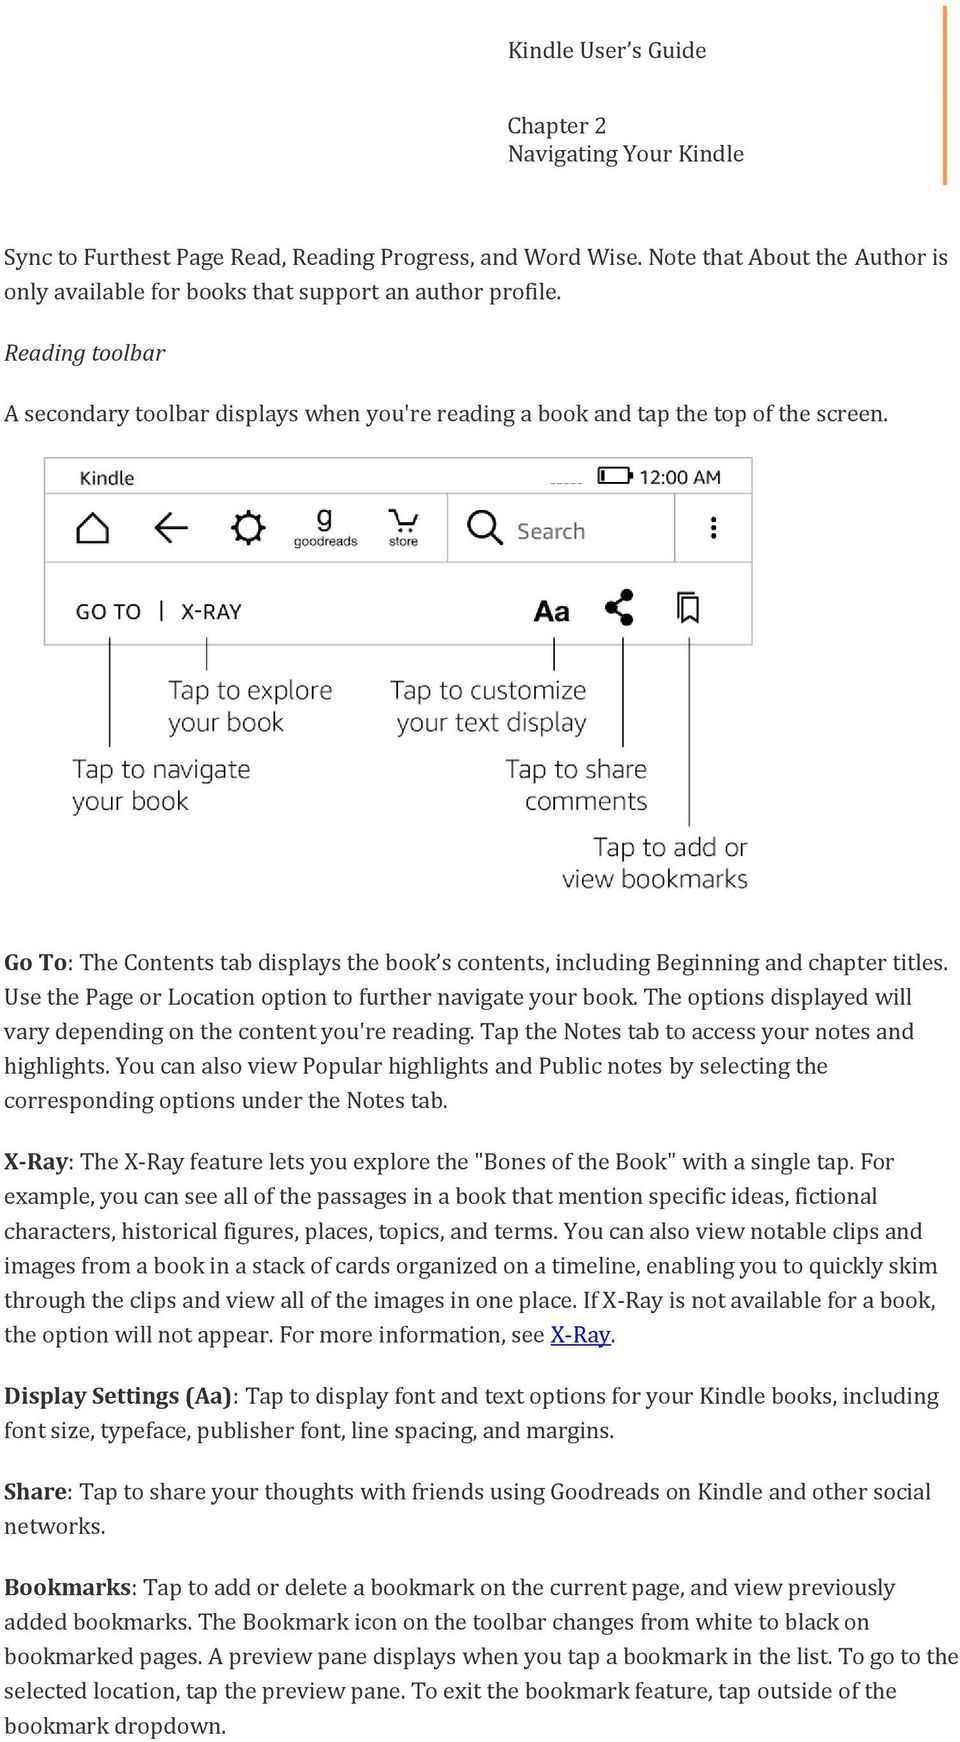 Use the Page or Location option to further navigate your book. The options displayed will vary depending on the content you're reading. Tap the Notes tab to access your notes and highlights.